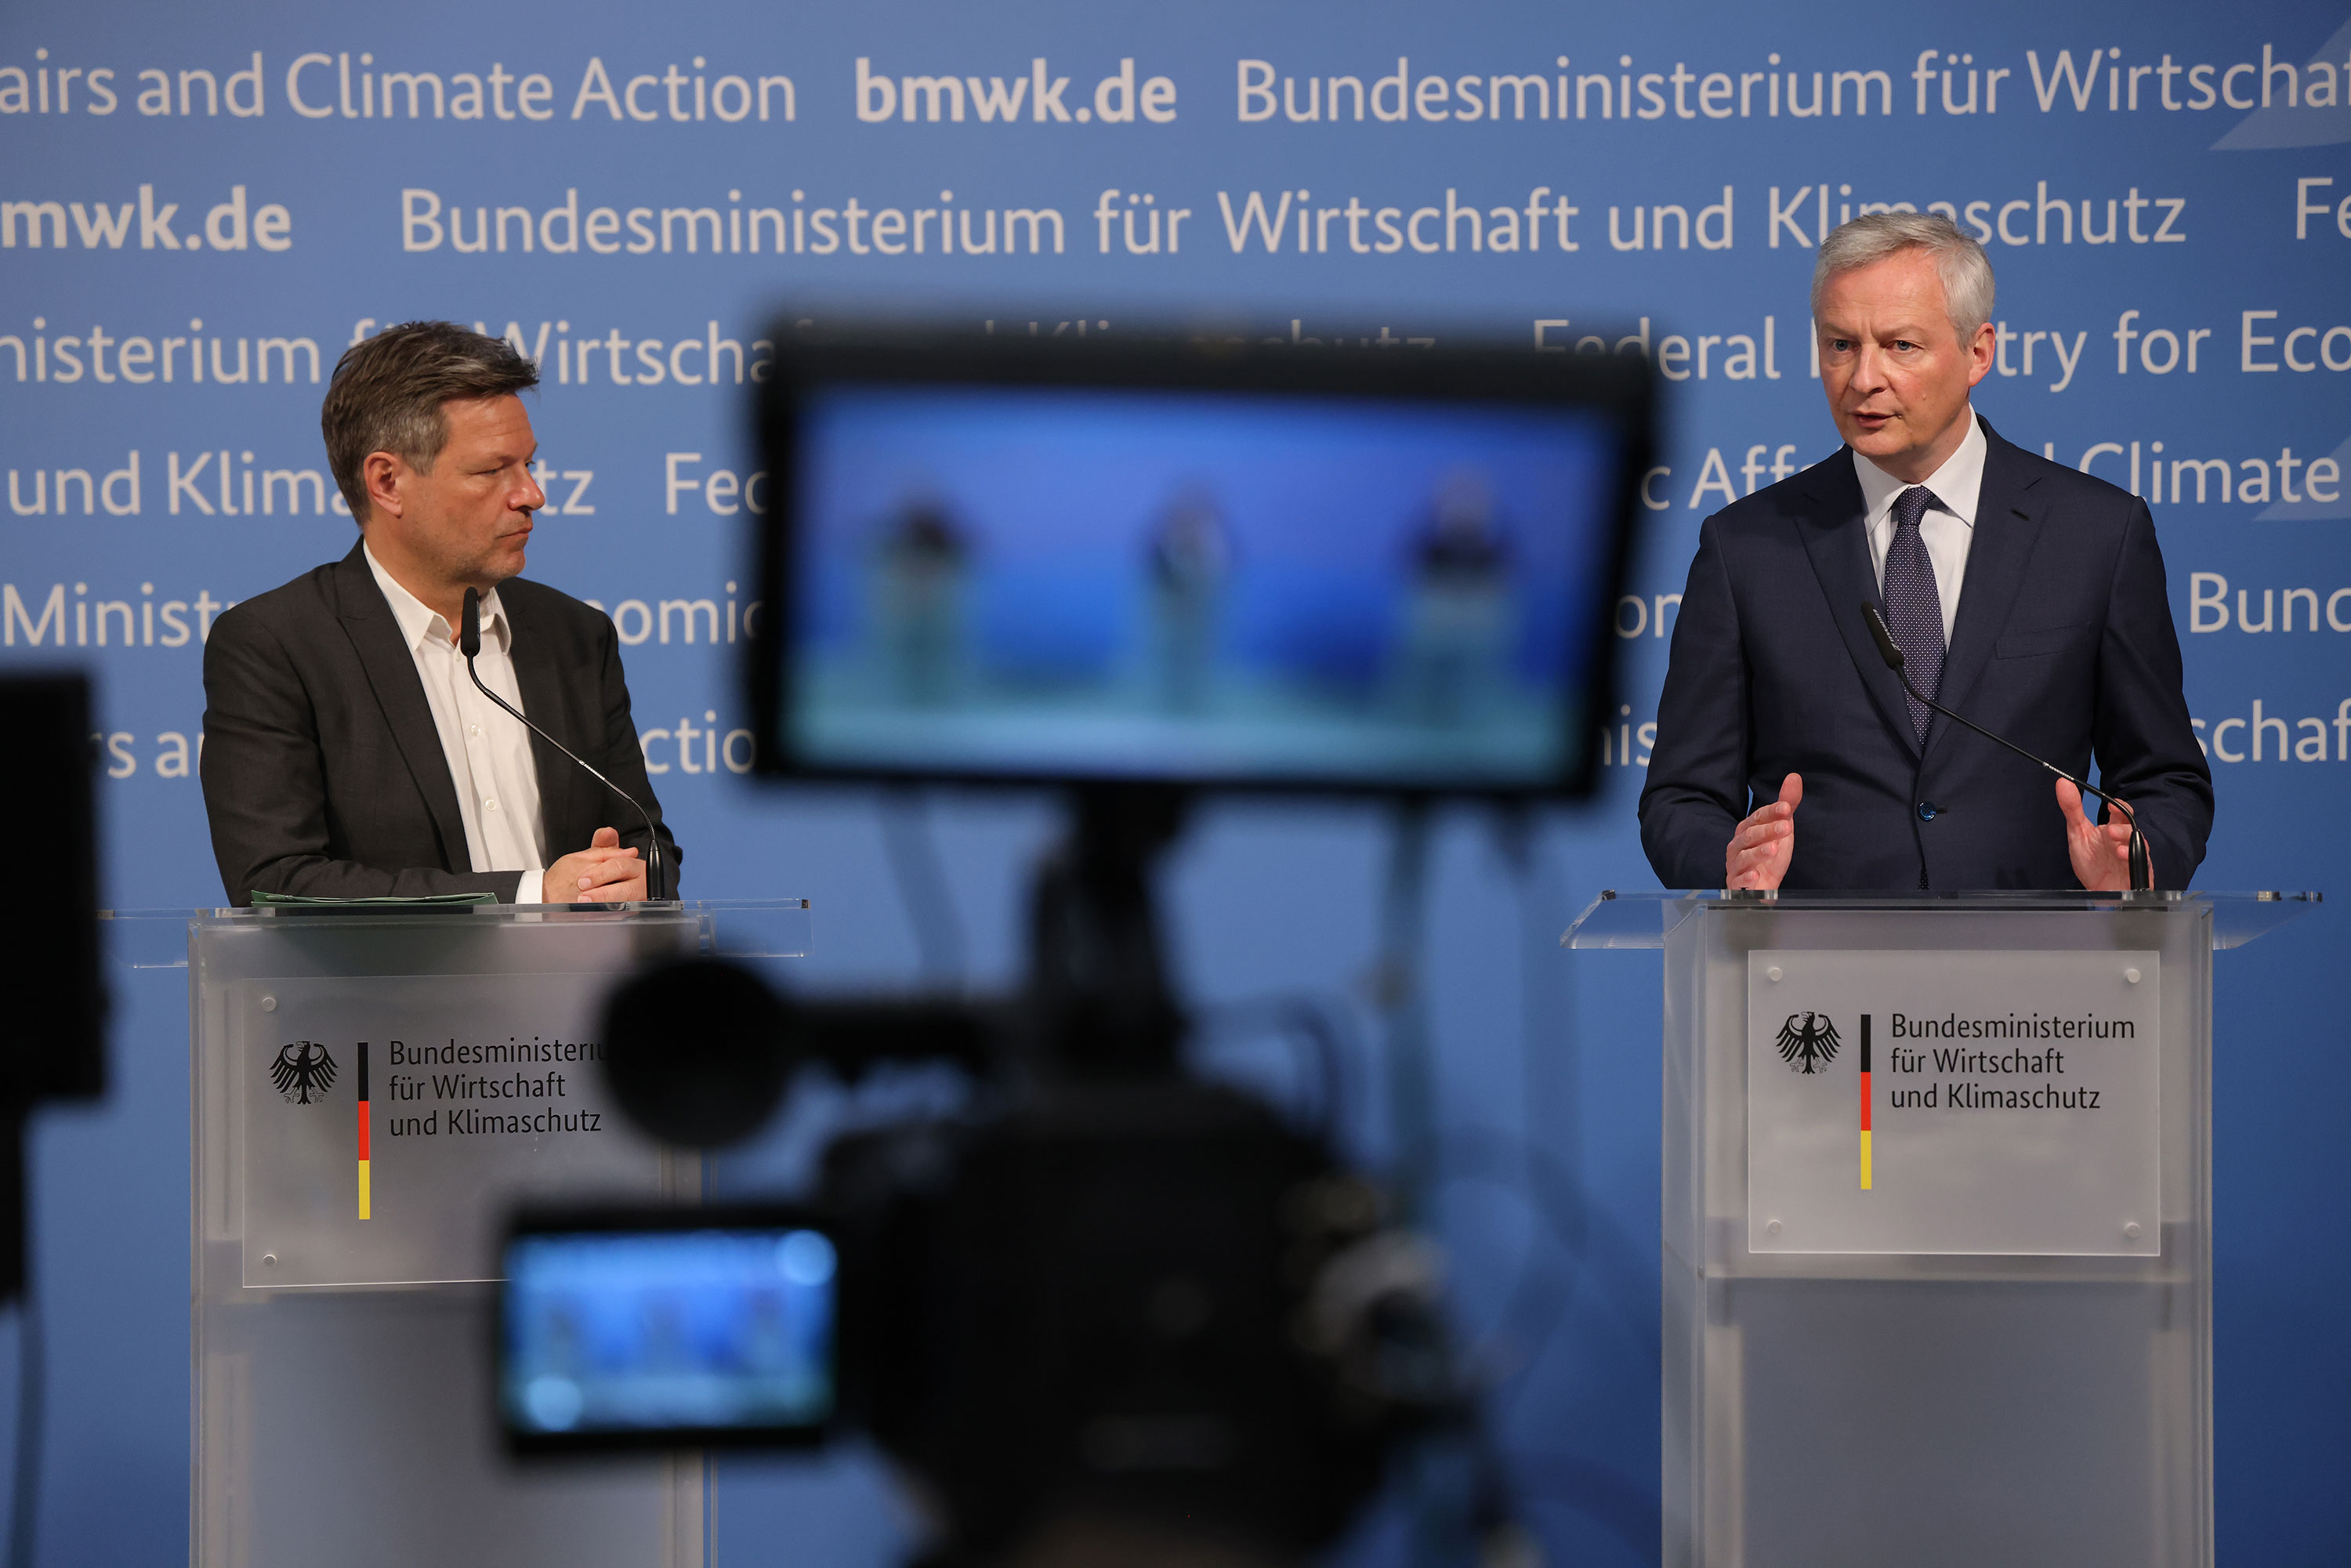 German Economy and Climate Protection Minister Robert Habeck, left, listens as French Minister of Economy and Finance Bruno Le Maire speaks during a news conference in Berlin on Thursday.